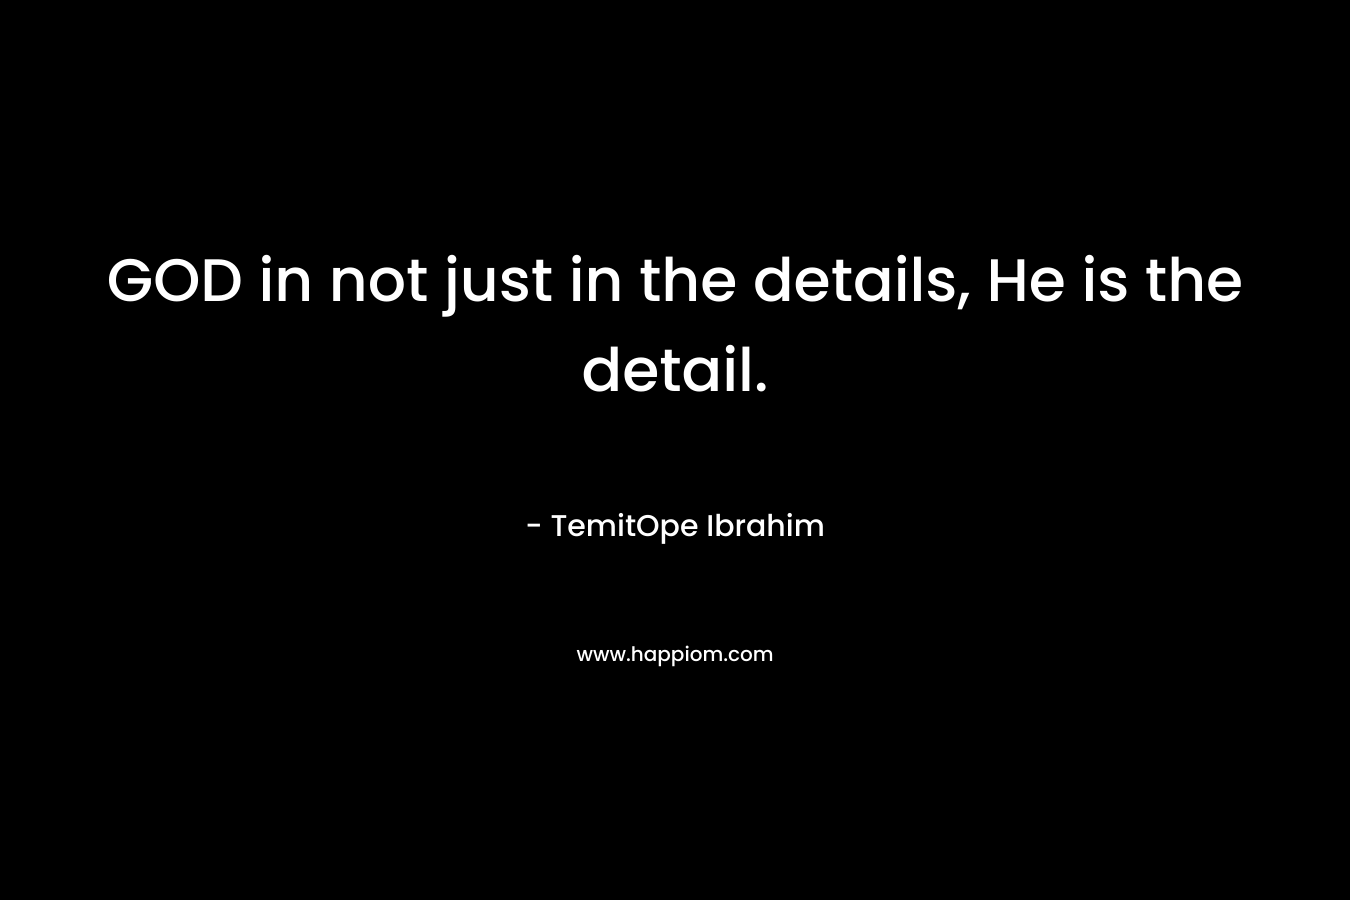 GOD in not just in the details, He is the detail.